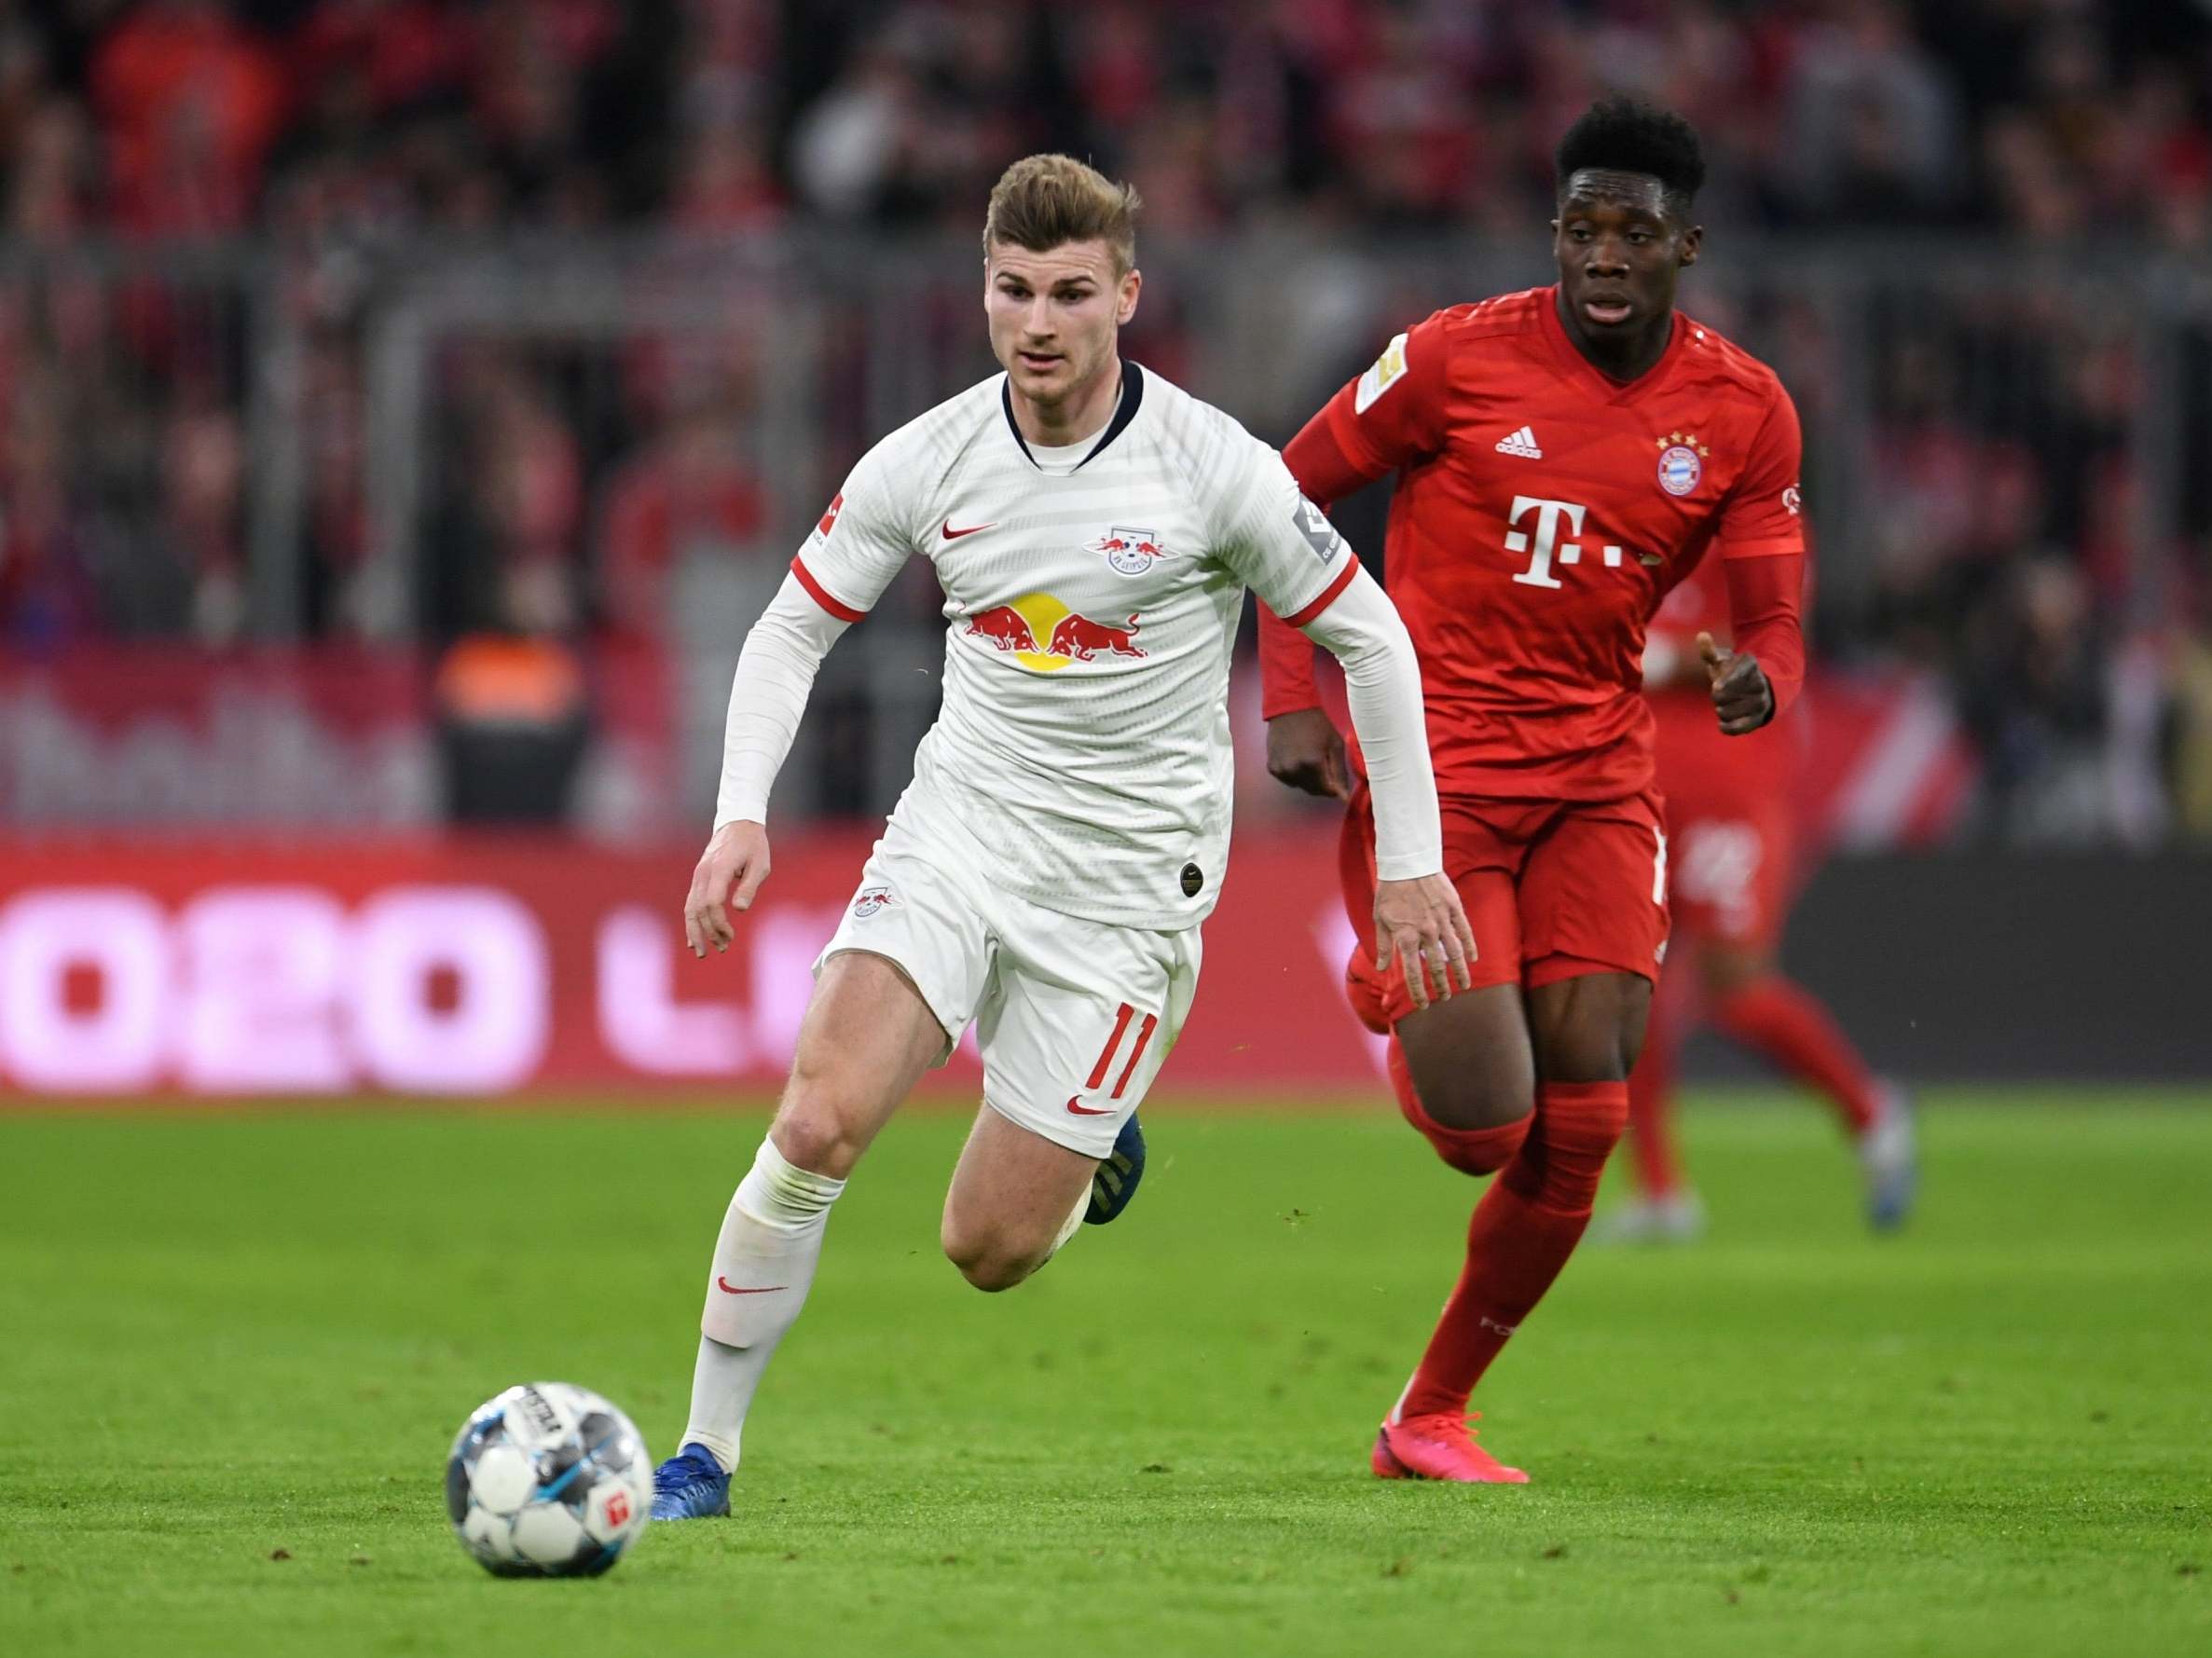 Timo Werner could emerge as a target for Jurgen Klopp